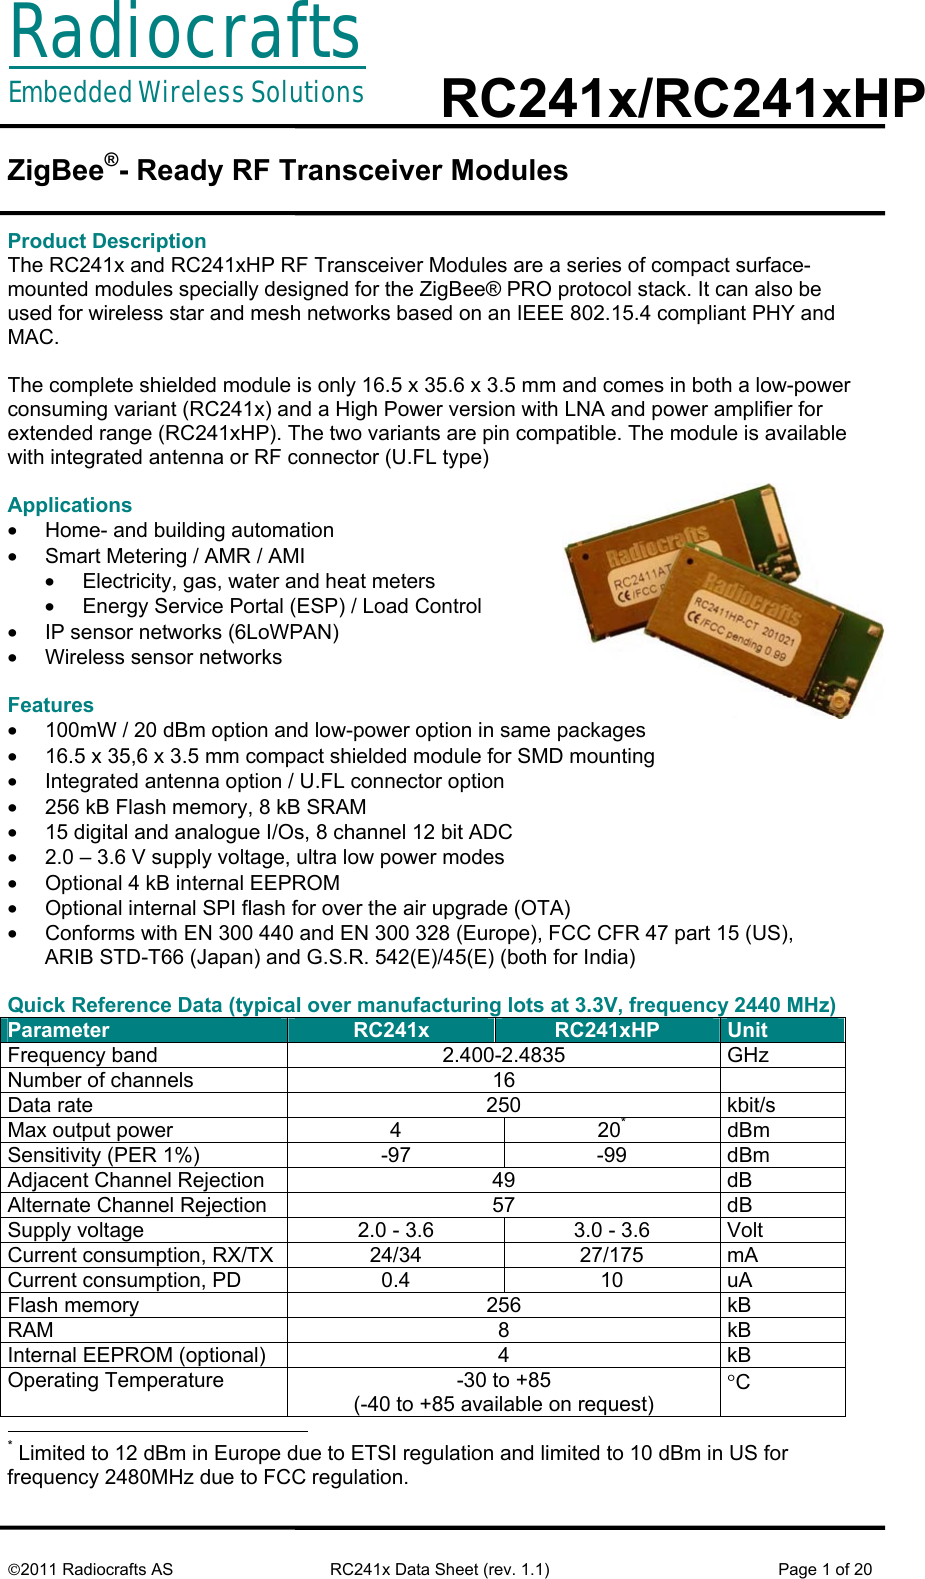 RadiocraftsEmbedded Wireless Solutions  RC241x/RC241xHP     ©2011 Radiocrafts AS  RC241x Data Sheet (rev. 1.1)  Page 1 of 20  ZigBee®- Ready RF Transceiver Modules   Product Description The RC241x and RC241xHP RF Transceiver Modules are a series of compact surface-mounted modules specially designed for the ZigBee® PRO protocol stack. It can also be used for wireless star and mesh networks based on an IEEE 802.15.4 compliant PHY and MAC.   The complete shielded module is only 16.5 x 35.6 x 3.5 mm and comes in both a low-power consuming variant (RC241x) and a High Power version with LNA and power amplifier for extended range (RC241xHP). The two variants are pin compatible. The module is available with integrated antenna or RF connector (U.FL type)  Applications •  Home- and building automation •  Smart Metering / AMR / AMI •  Electricity, gas, water and heat meters •  Energy Service Portal (ESP) / Load Control •  IP sensor networks (6LoWPAN) •  Wireless sensor networks  Features •  100mW / 20 dBm option and low-power option in same packages •  16.5 x 35,6 x 3.5 mm compact shielded module for SMD mounting •  Integrated antenna option / U.FL connector option •  256 kB Flash memory, 8 kB SRAM •  15 digital and analogue I/Os, 8 channel 12 bit ADC •  2.0 – 3.6 V supply voltage, ultra low power modes •  Optional 4 kB internal EEPROM •  Optional internal SPI flash for over the air upgrade (OTA) •  Conforms with EN 300 440 and EN 300 328 (Europe), FCC CFR 47 part 15 (US),  ARIB STD-T66 (Japan) and G.S.R. 542(E)/45(E) (both for India)  Quick Reference Data (typical over manufacturing lots at 3.3V, frequency 2440 MHz) Parameter  RC241x  RC241xHP  Unit Frequency band  2.400-2.4835  GHz Number of channels  16   Data rate  250  kbit/s Max output power  4  20* dBm Sensitivity (PER 1%)  -97  -99  dBm Adjacent Channel Rejection  49  dB Alternate Channel Rejection  57  dB Supply voltage  2.0 - 3.6  3.0 - 3.6  Volt Current consumption, RX/TX  24/34  27/175  mA Current consumption, PD  0.4  10  uA Flash memory  256  kB RAM 8 kB Internal EEPROM (optional)  4  kB Operating Temperature   -30 to +85 (-40 to +85 available on request) °C                                                       * Limited to 12 dBm in Europe due to ETSI regulation and limited to 10 dBm in US for frequency 2480MHz due to FCC regulation. 